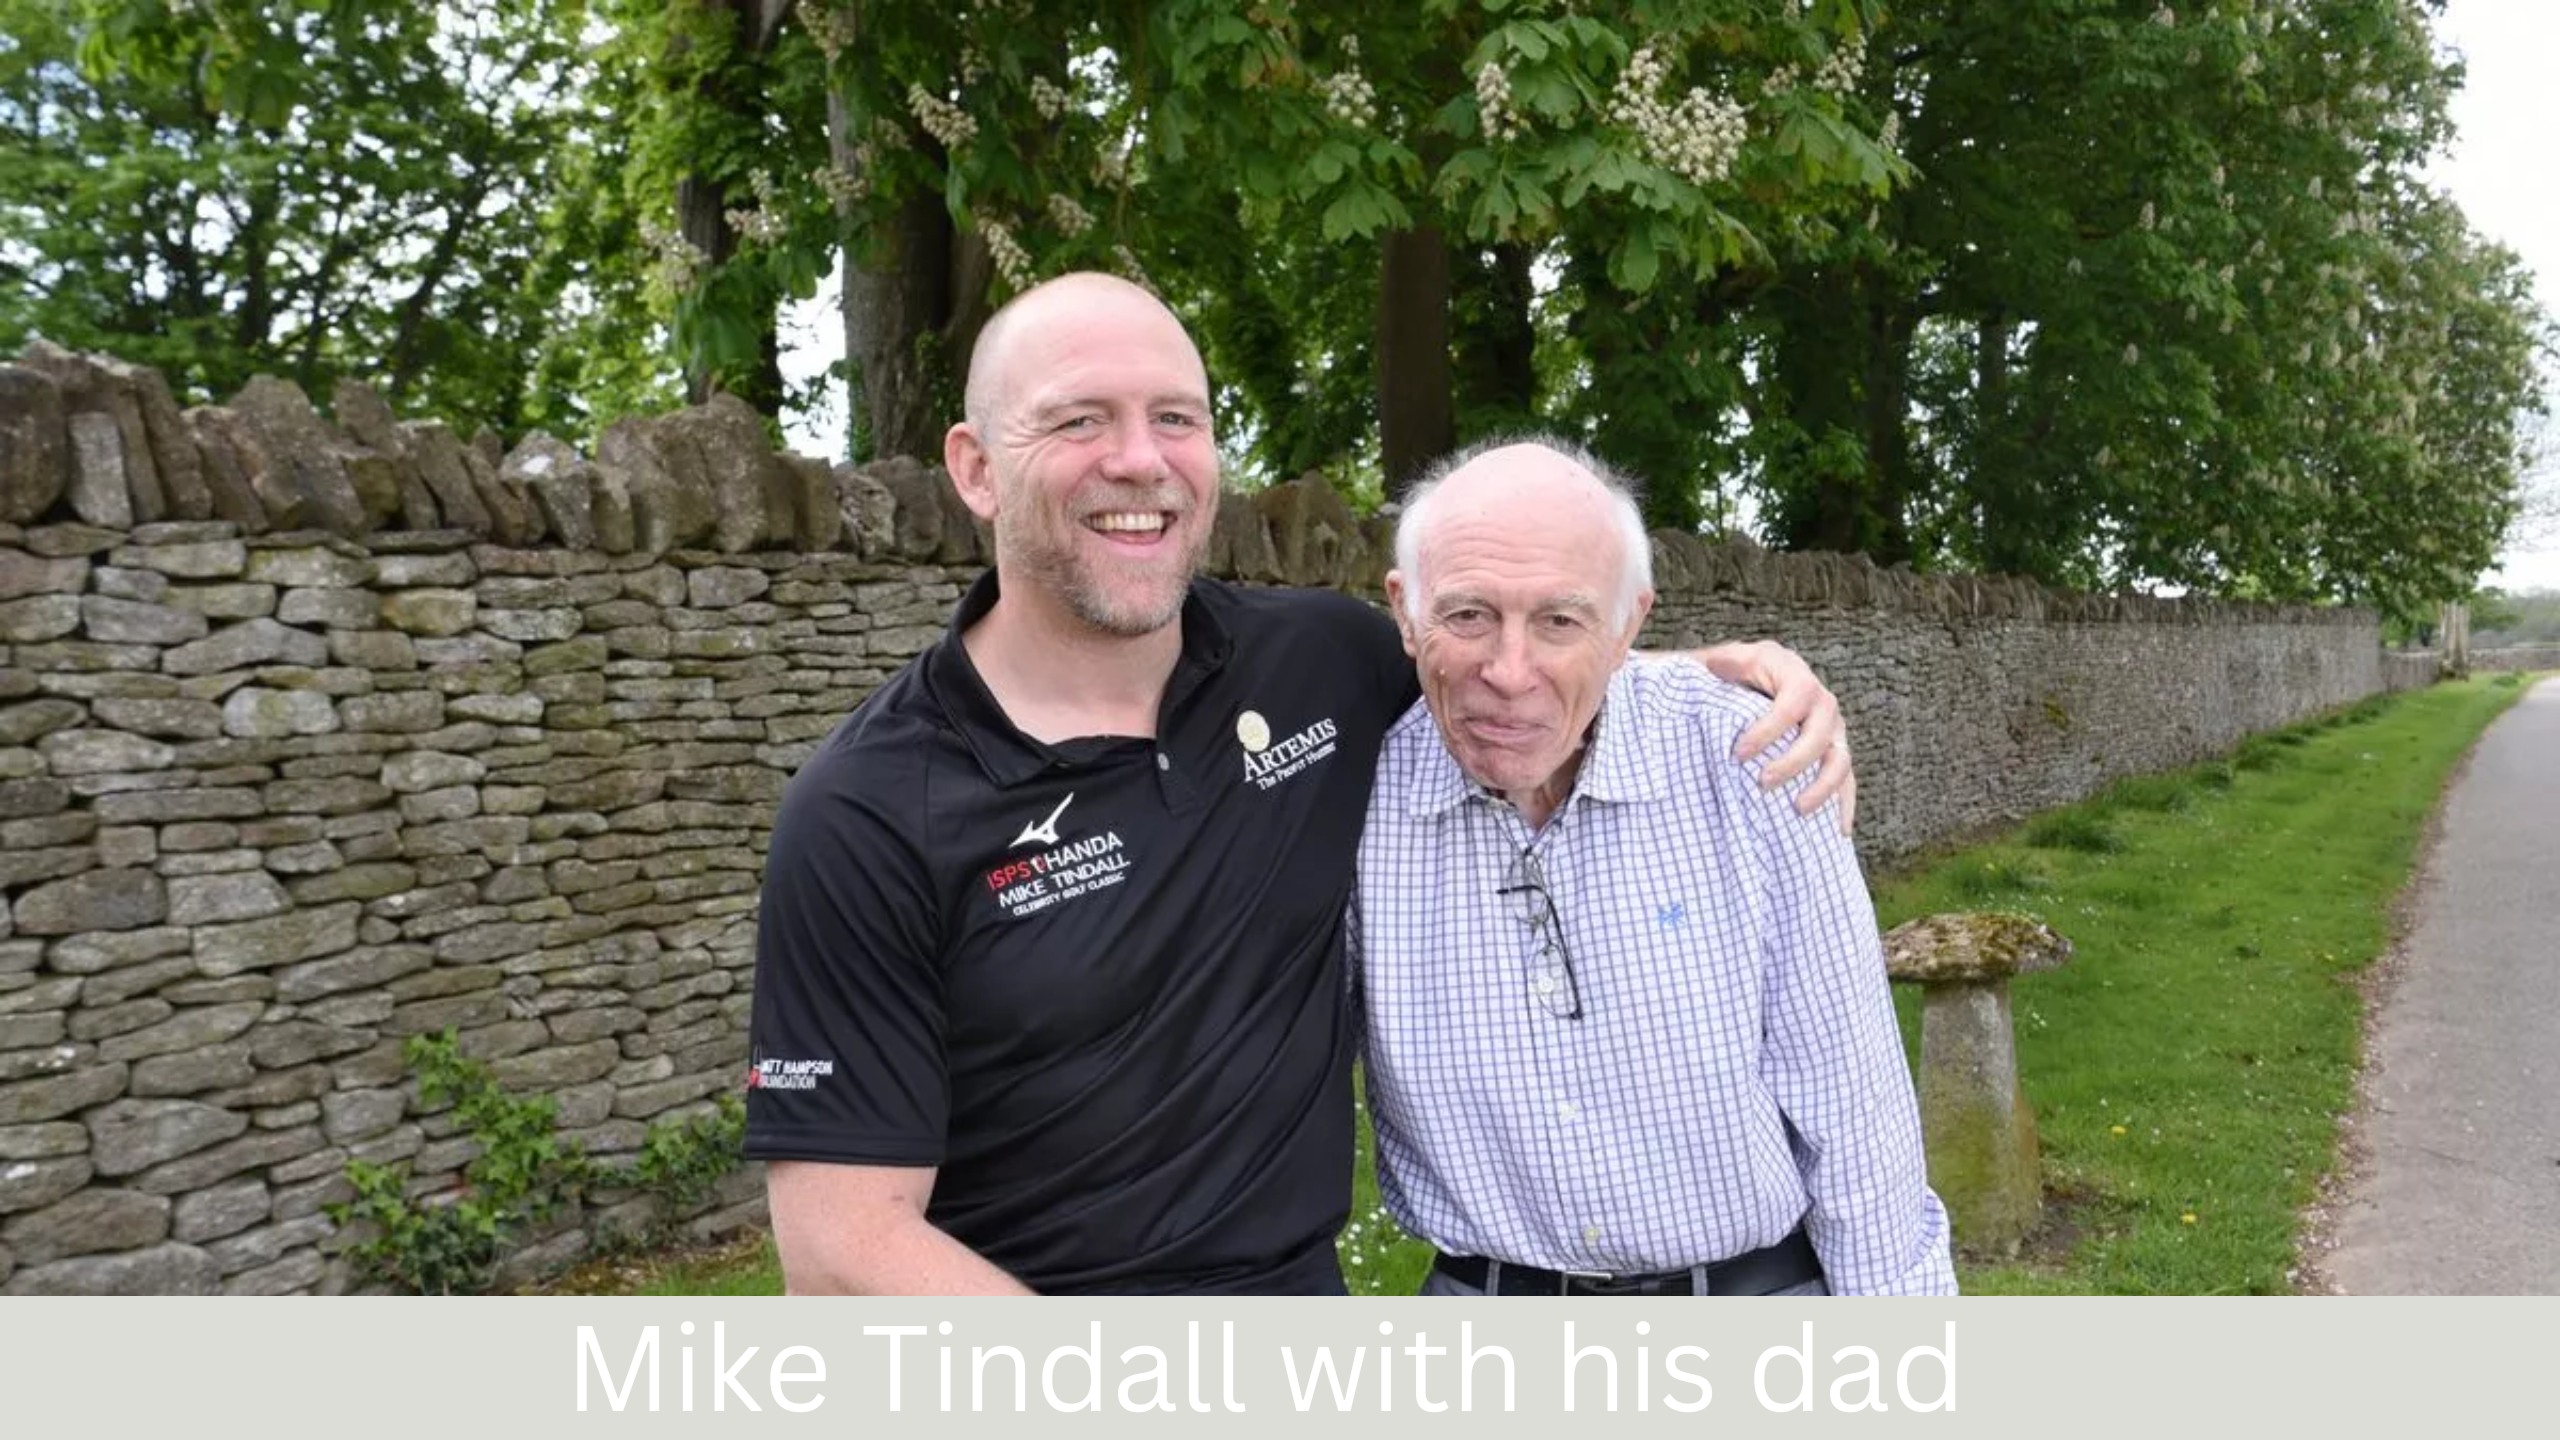 Mike Tindall parents 